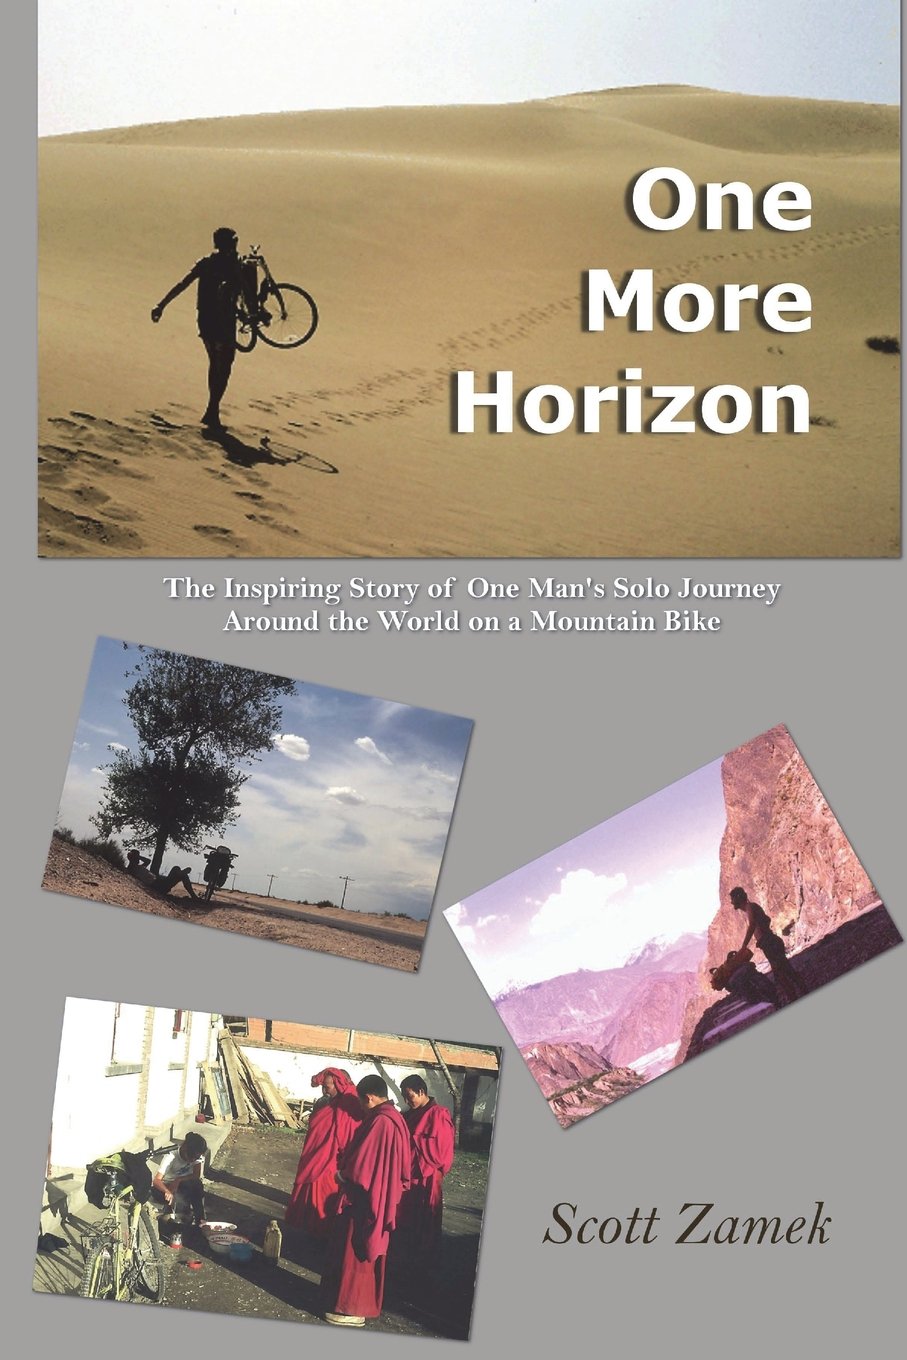 One More Horizon: The Inspiring Story of One Man's Solo Journey Around the World on a Mountain Bike